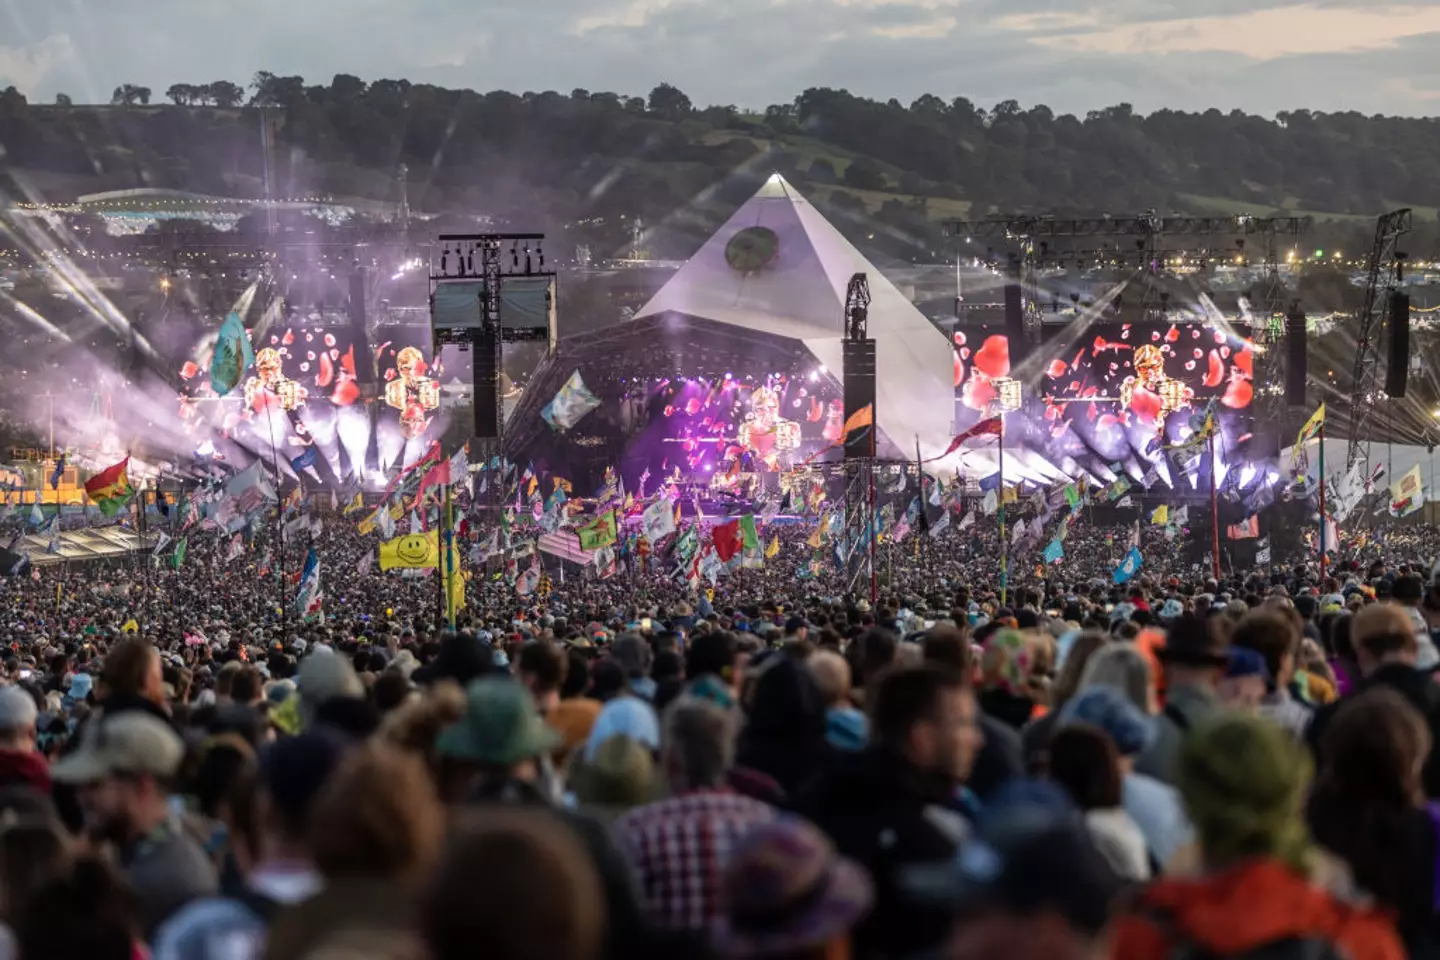 There's more to Glastonbury than the Pyramid Stage. (Matt Cardy/Getty Images)